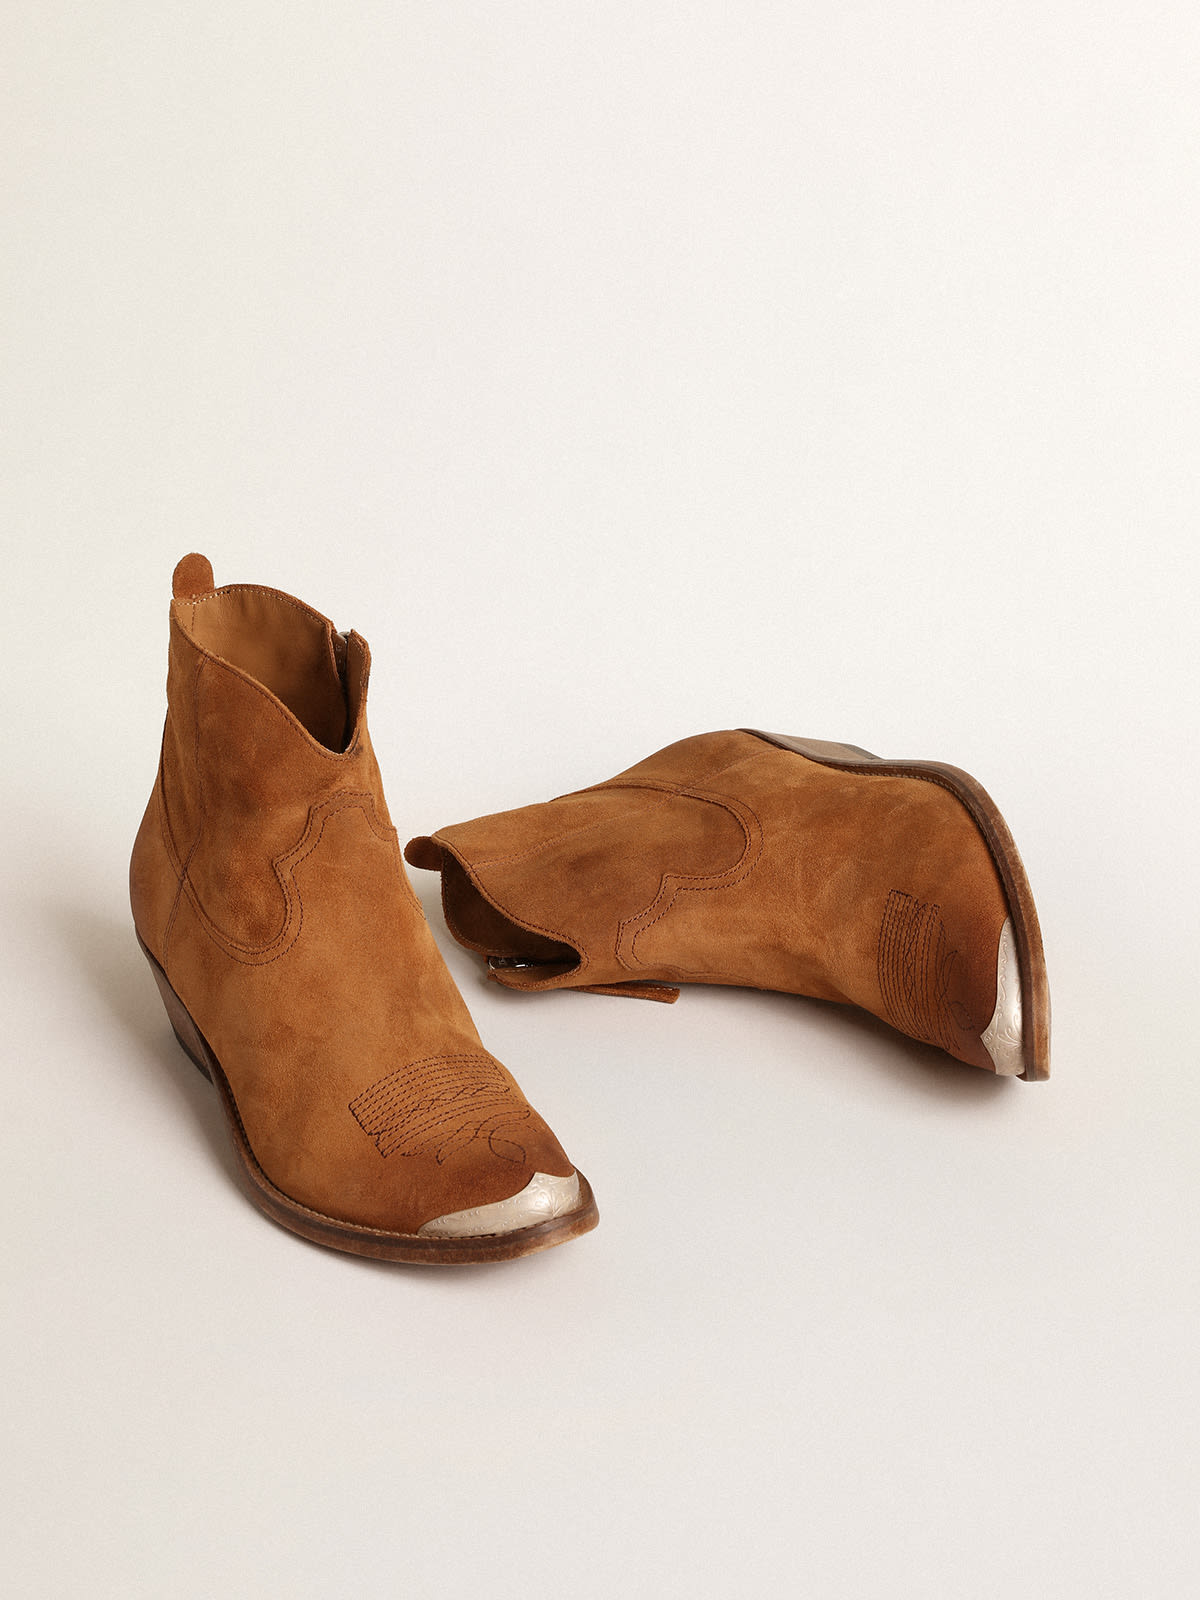 Golden Goose - Young ankle boots in cognac-colored suede in 